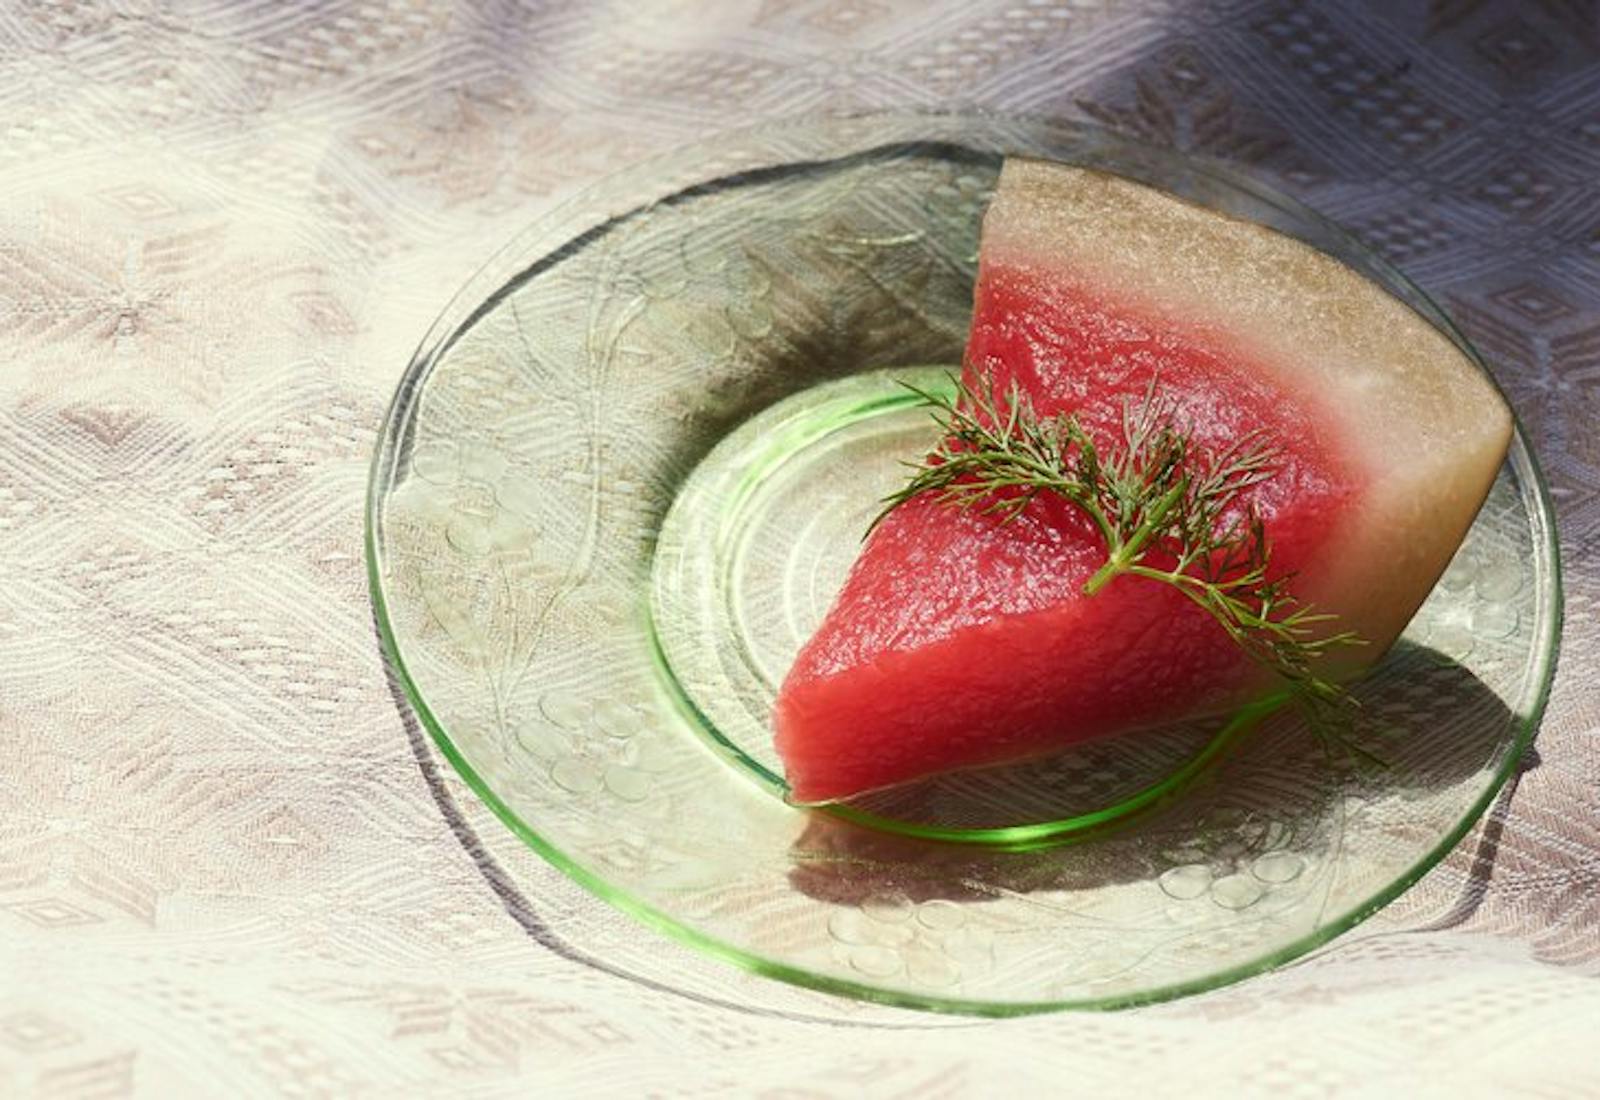 Slice of pickled watermelon with sprig of dill on top.